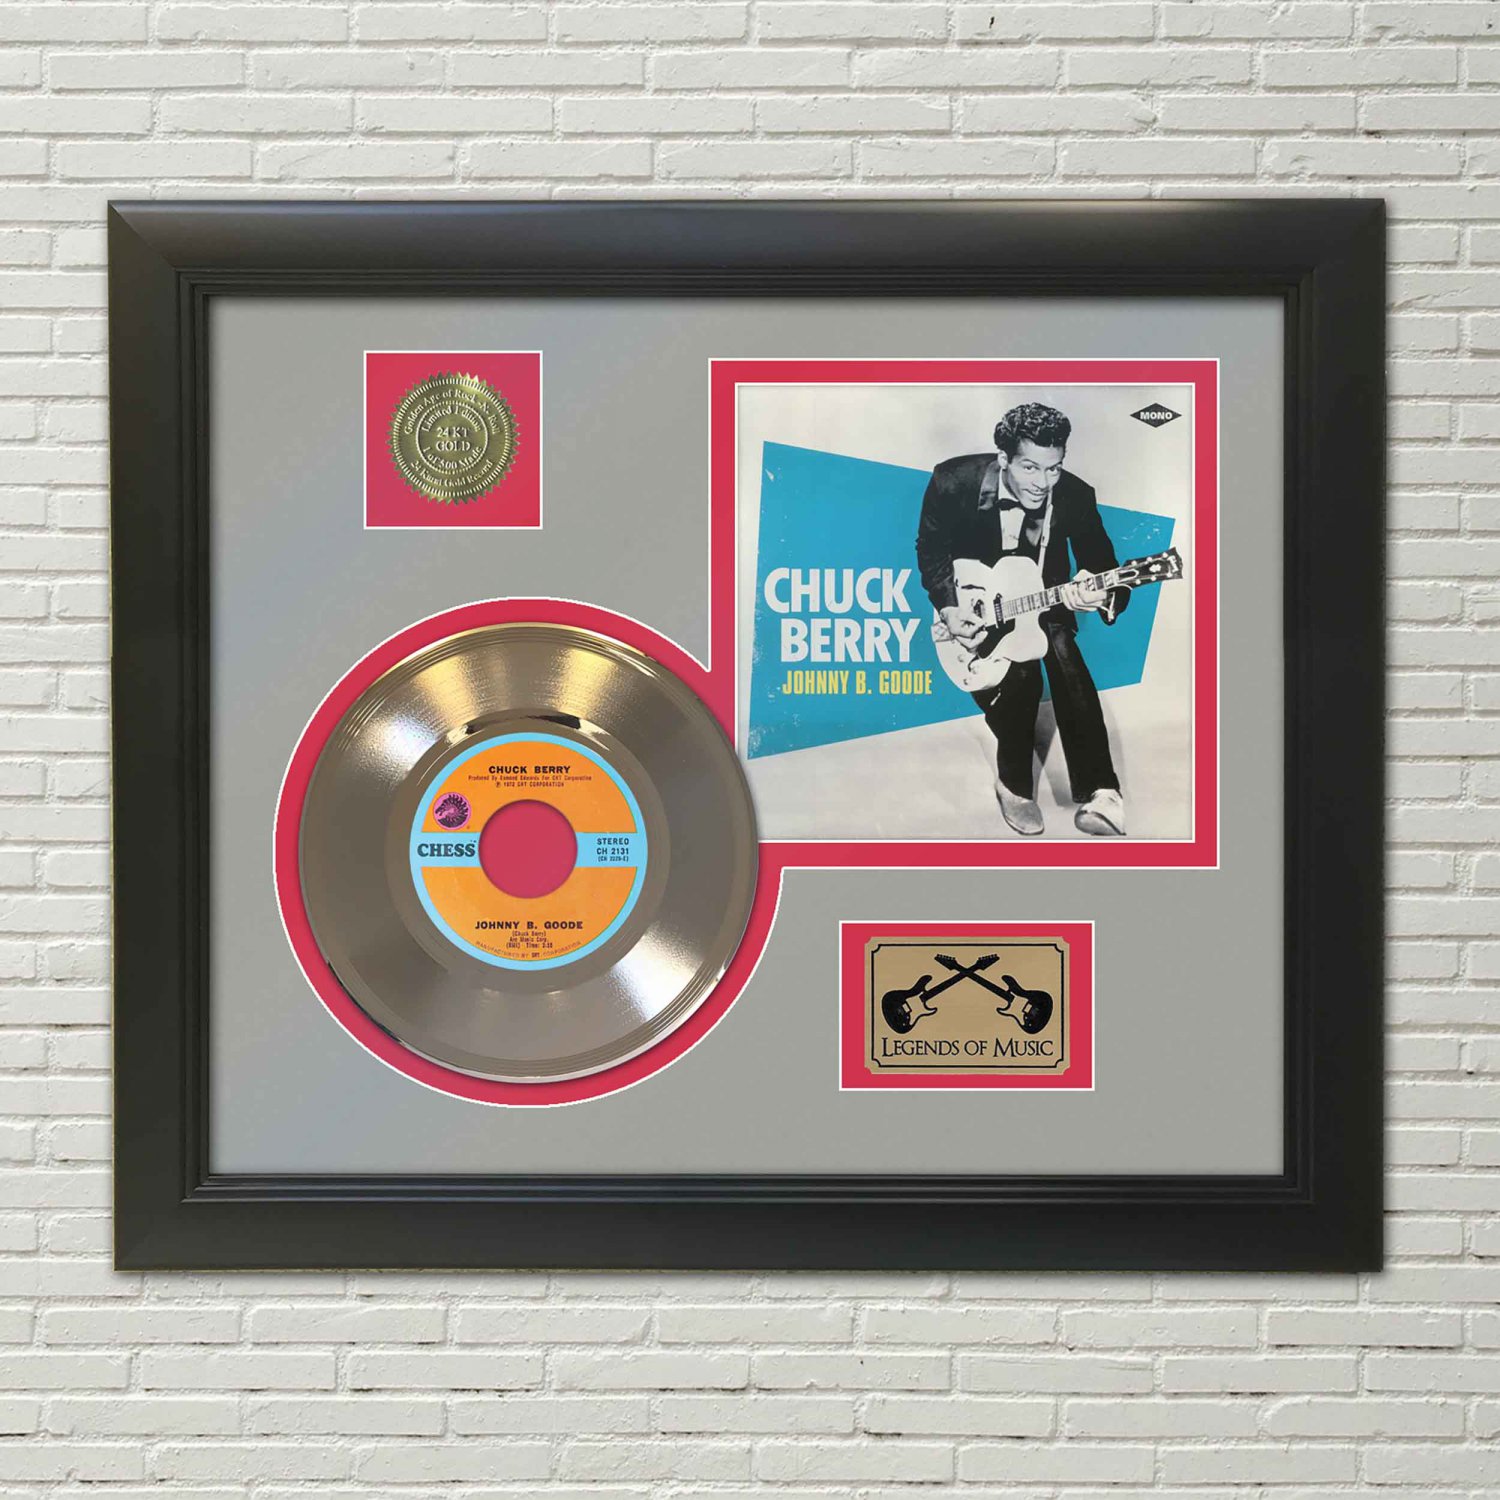 CHUCK BERRY "Johnny B. Goode" Framed Picture Sleeve Gold 45 Record Display